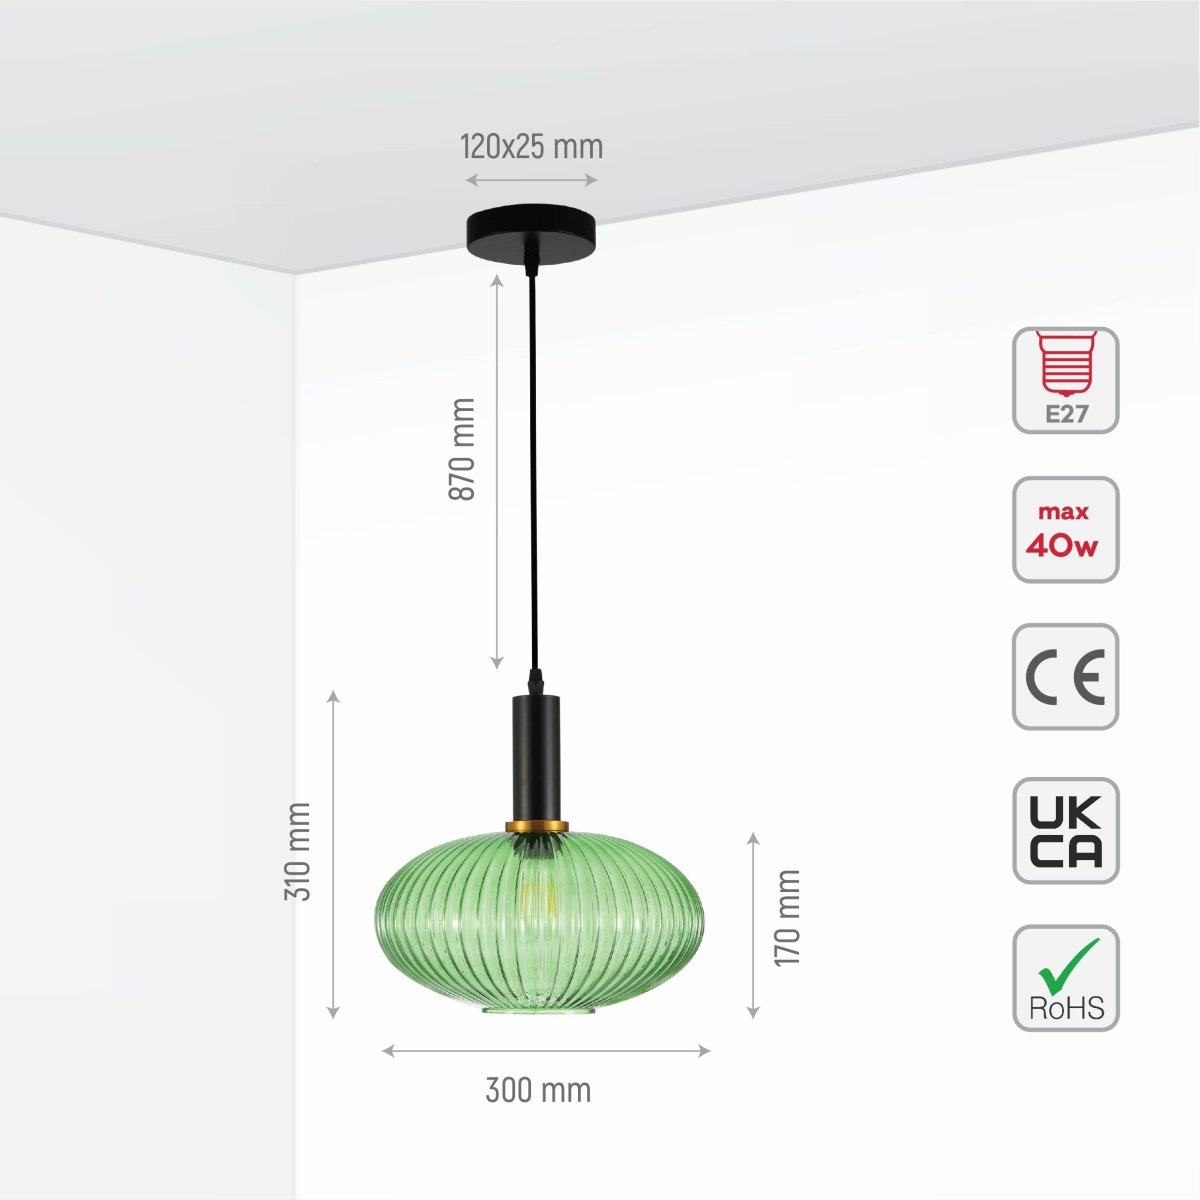 Size and specs of Sawyer Ribbed Fluted Reeded Maloto Lantern Green Glass Pendant Ceiling Light E27 Black Metal Top | TEKLED 150-18716